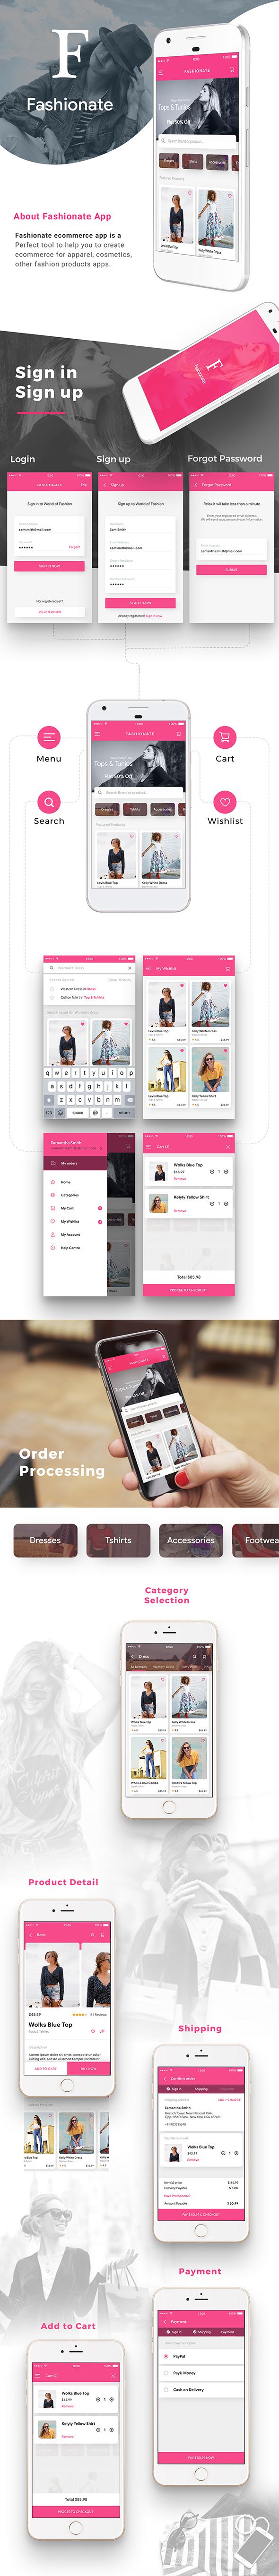 Fashion Ecommerce Android App + Fashion Ecommerce iOS App Template (HTML + CSS IONIC 3) | Fashionate - 1